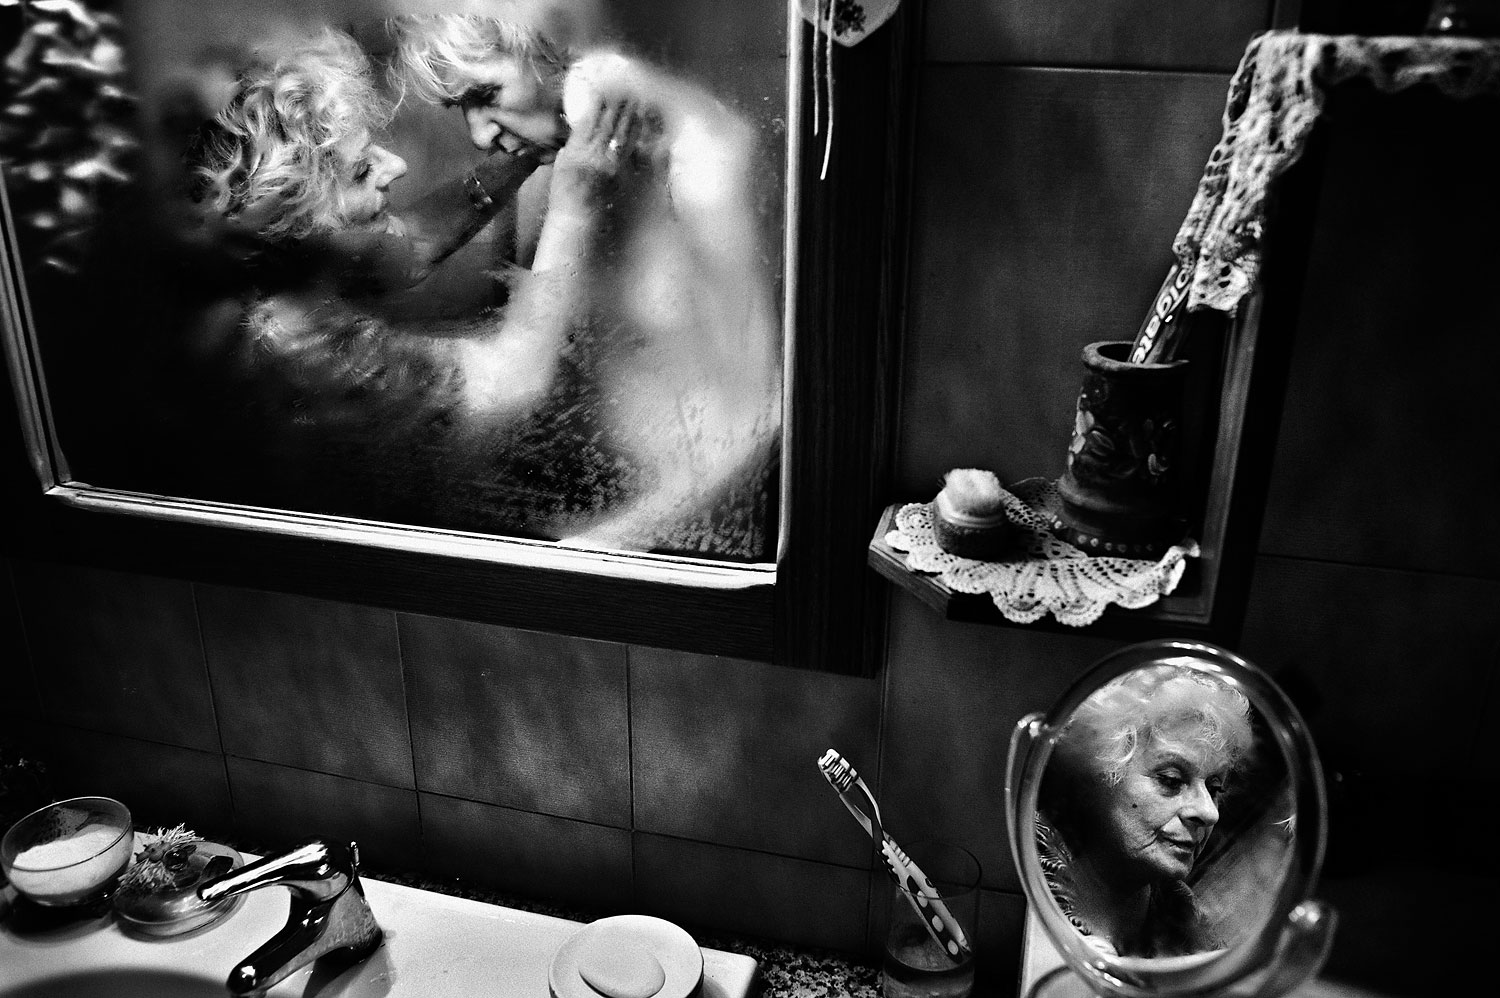 1st Prize Daily Life Stories. Fausto Podavini, Italy. 1 June 2010, Rome, Italy. Despite her husband's life-threatening disease, Mirella devoted her life to assisting Luigi, trying to be positive and reassuring, looking after him with intense love and respect. Everyday care, usually done in a few minutes, takes hours when it concerns someone with dementia. Mirella, 71, spent 43 years of her life with the only person she loved, with all of life's difficulties, laughter, and beautiful moments. But over the last six years things changed: Mirella lived with her husband Luigi’s illness, Alzheimer’s, and devoted her life to him as his caregiver.